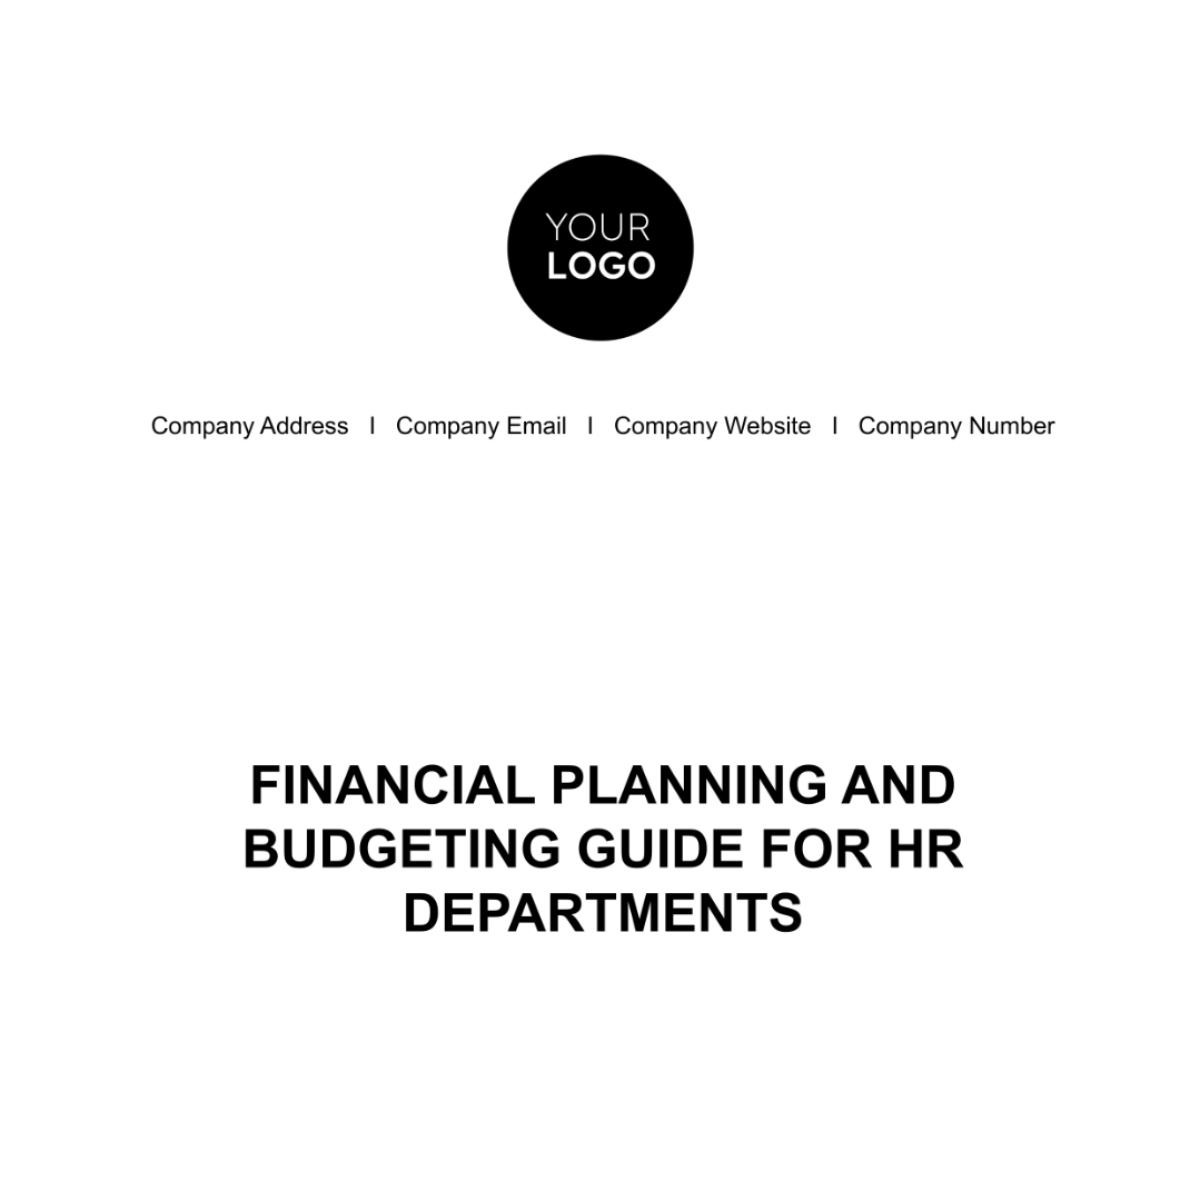 Free Financial Planning and Budgeting Guide for HR Departments Template